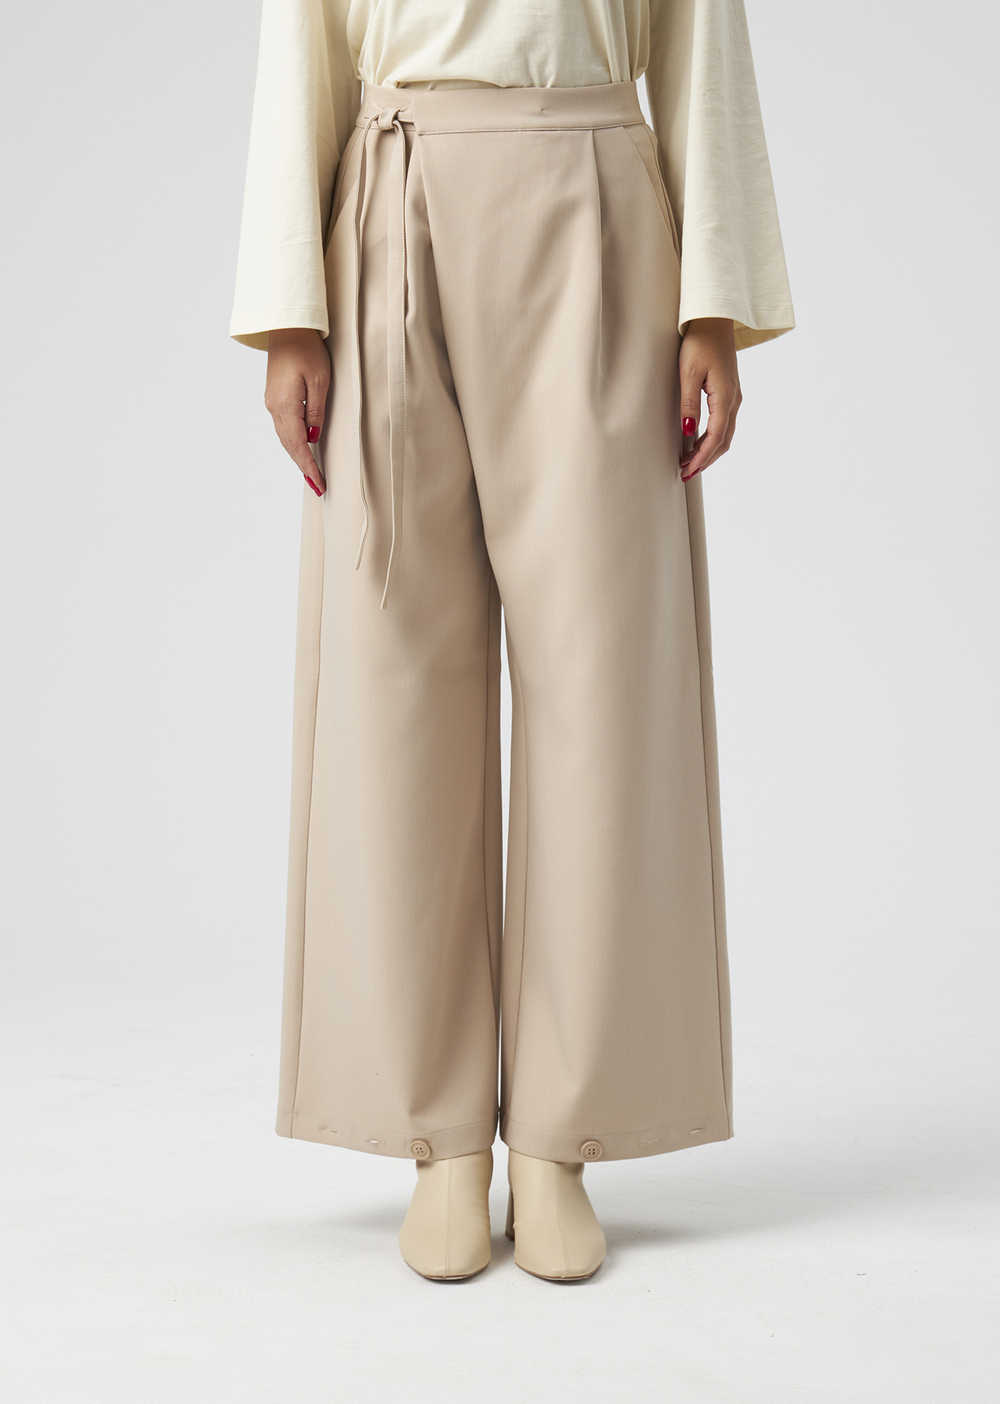 BUTTON-FRONT TROUSERS | S | BEIGE